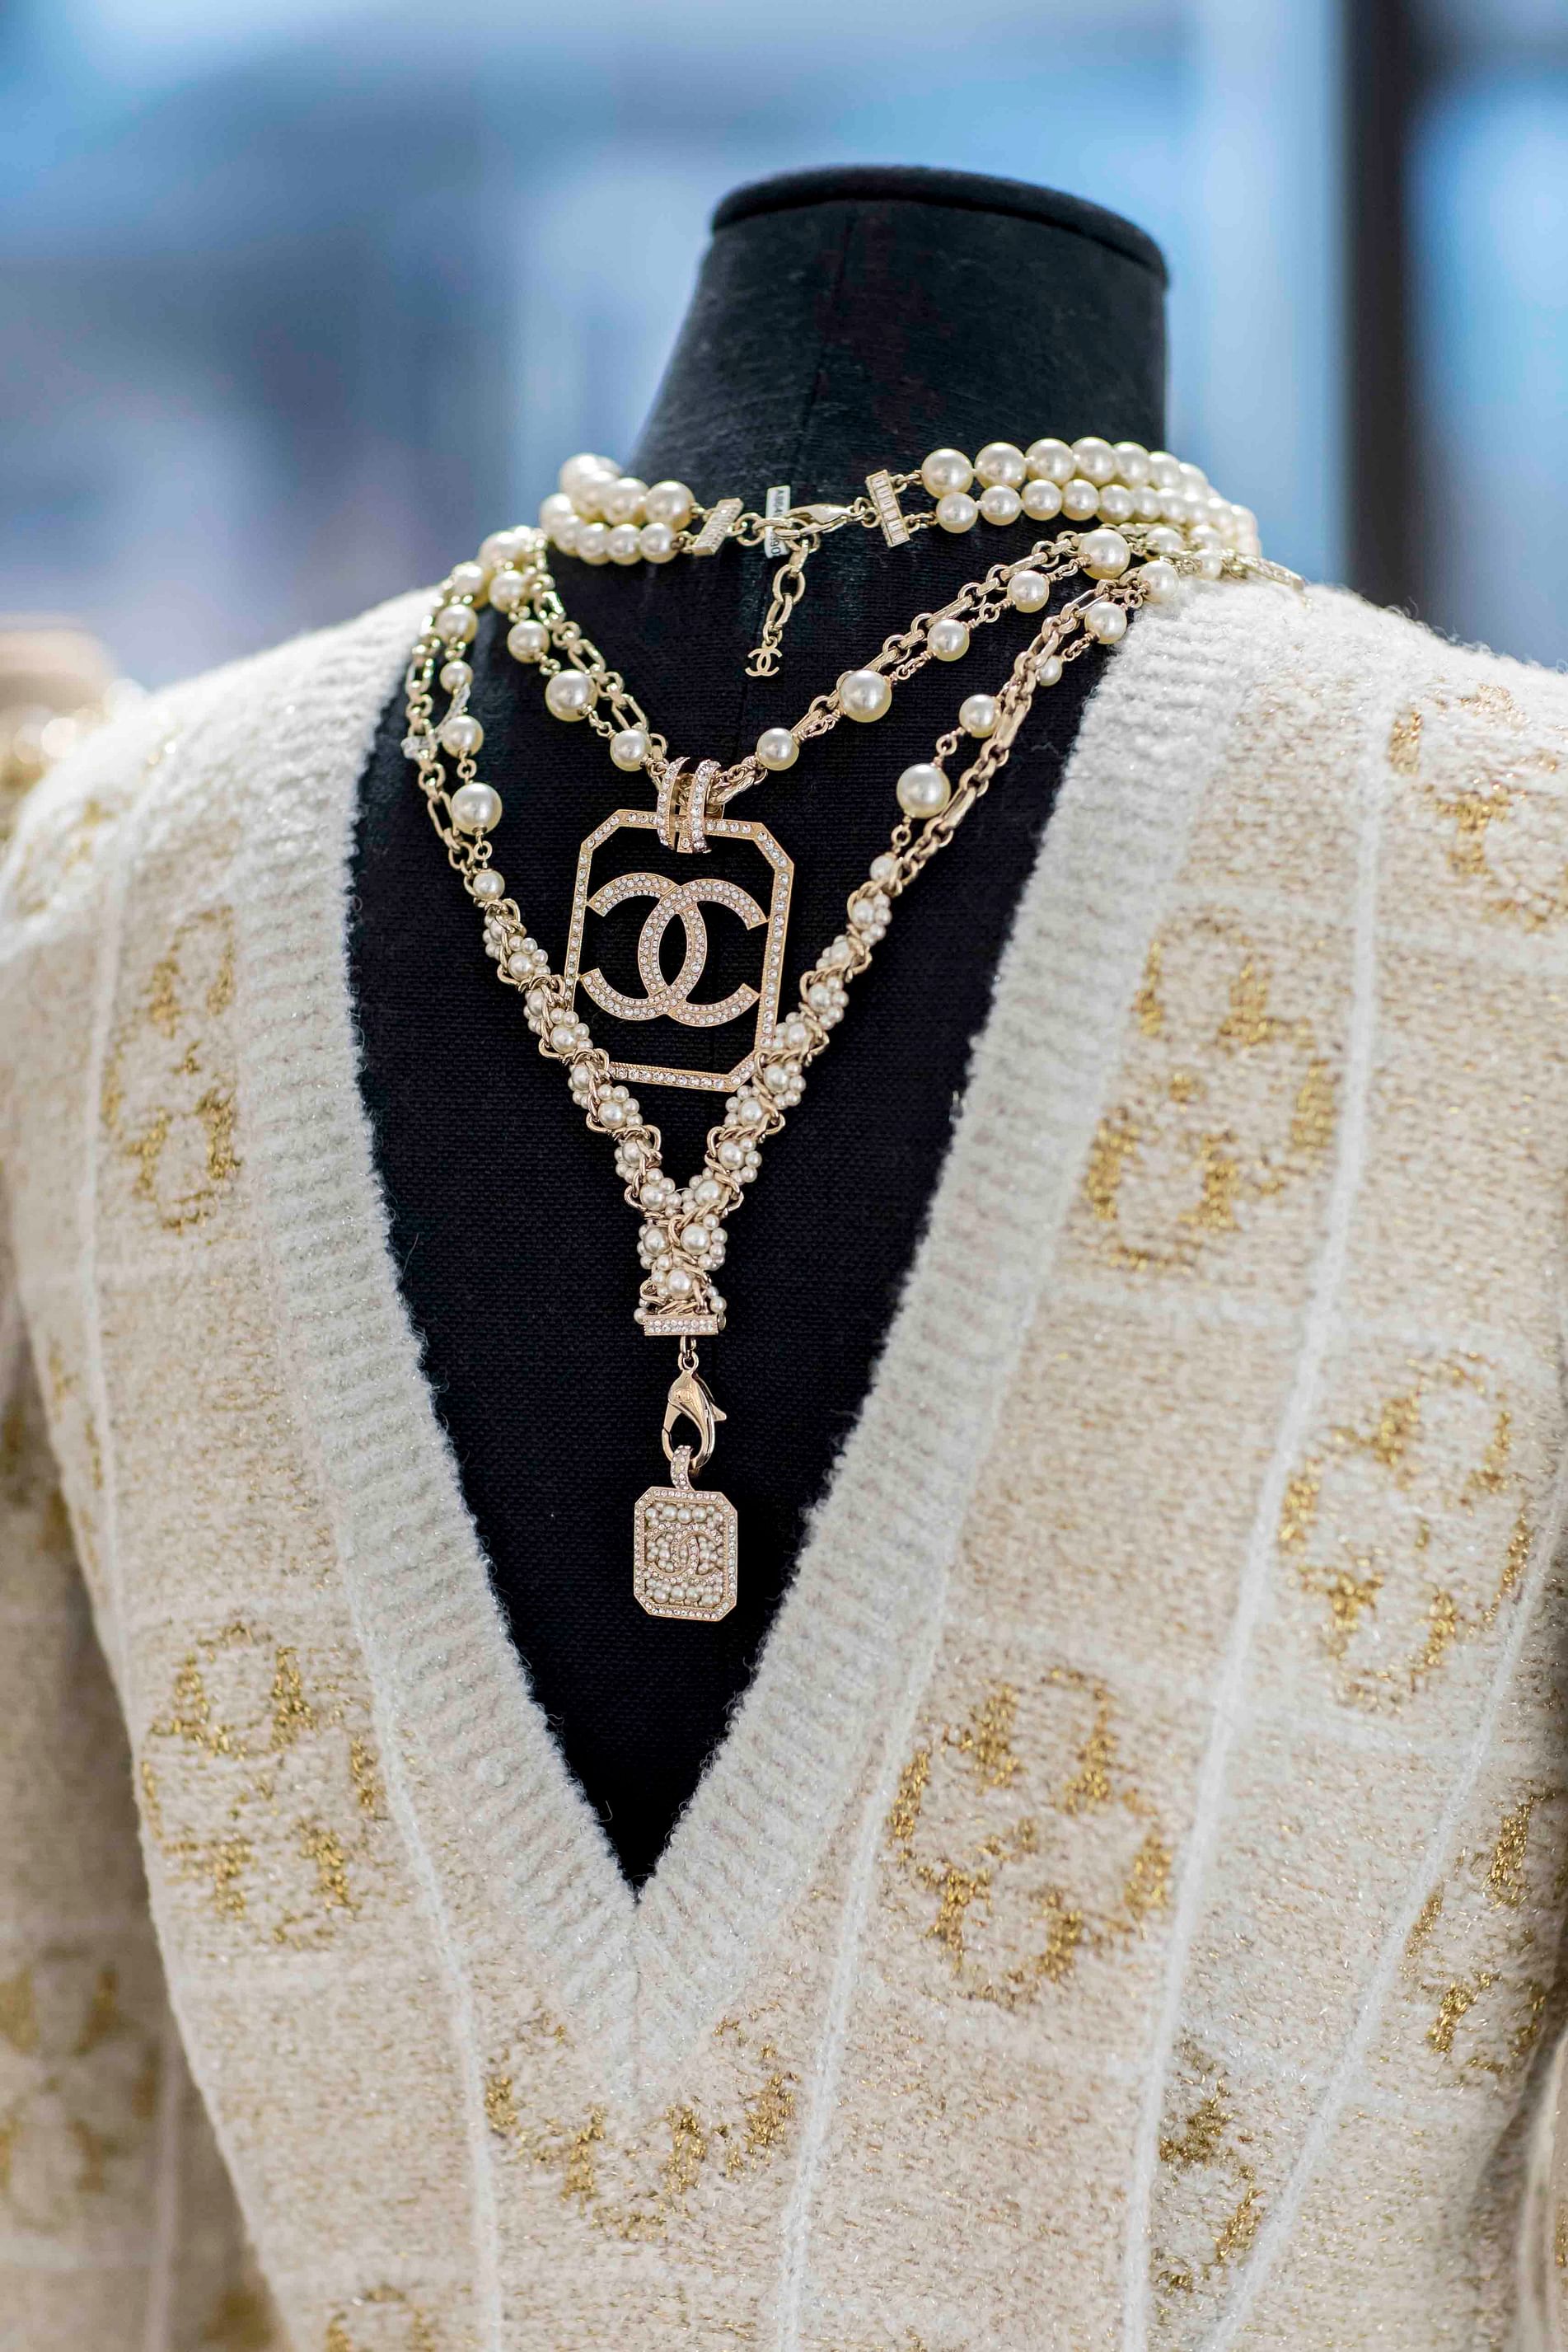 Don't miss your chance to explore Chanel's first fashion pop-up